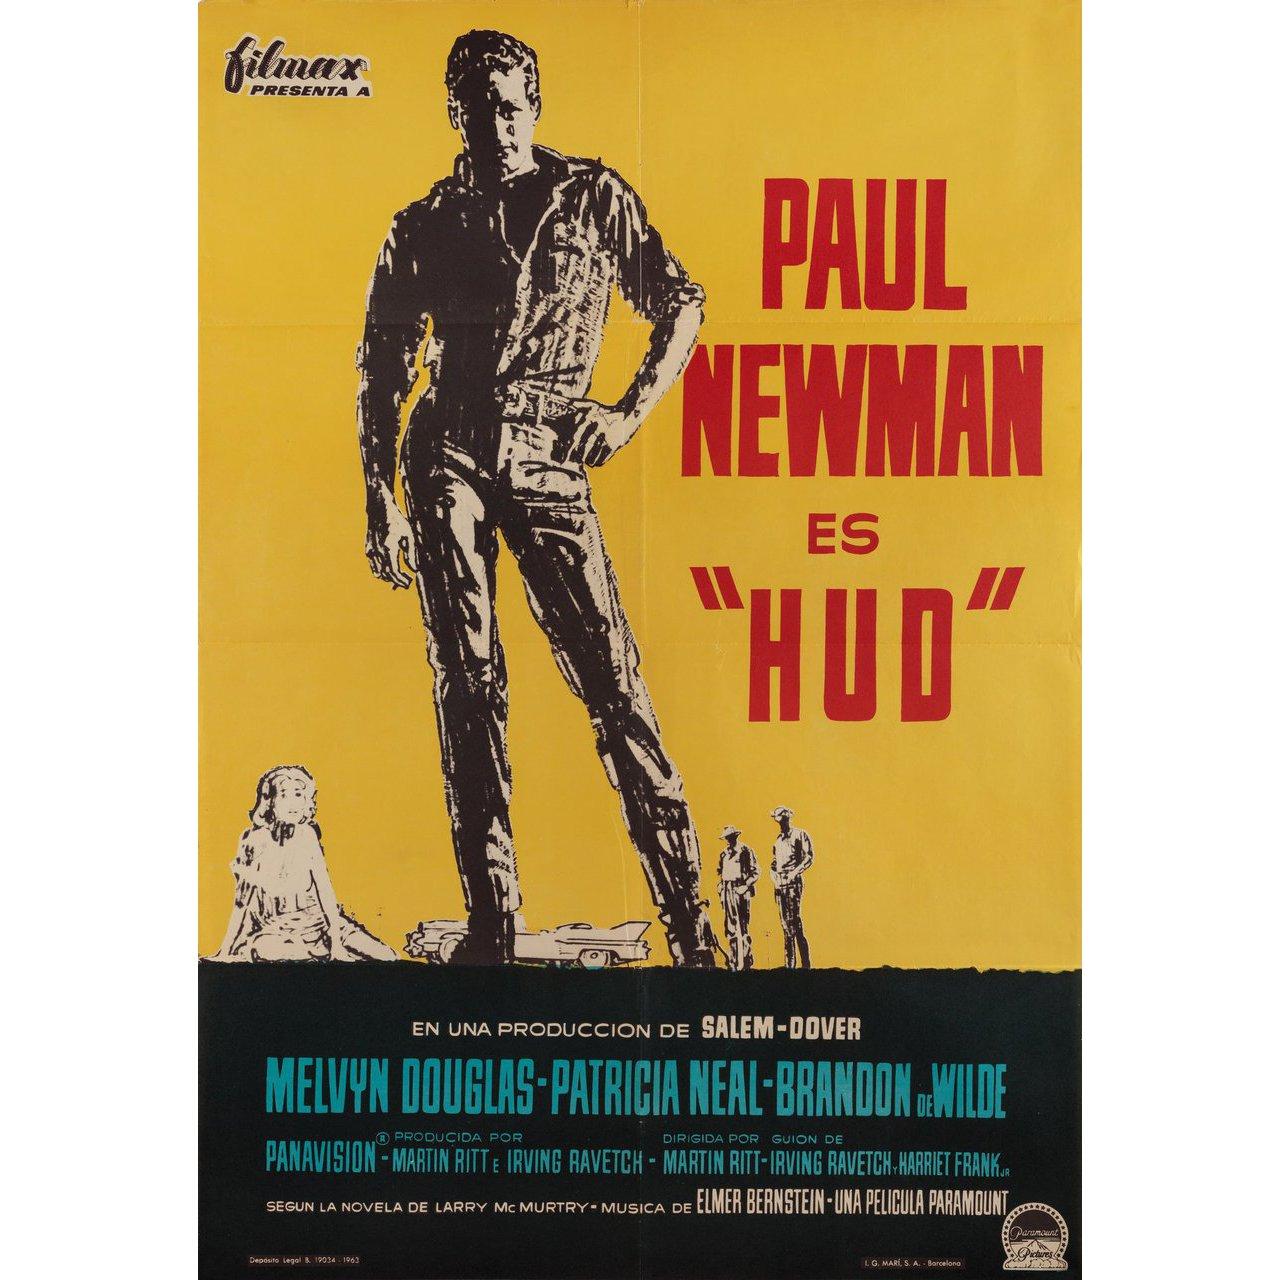 Original 1963 Spanish B1 poster for the film Hud directed by Martin Ritt with Paul Newman / Melvyn Douglas / Patricia Neal / Brandon De Wilde. Very Good condition, folded with fold separation. Many original posters were issued folded or were